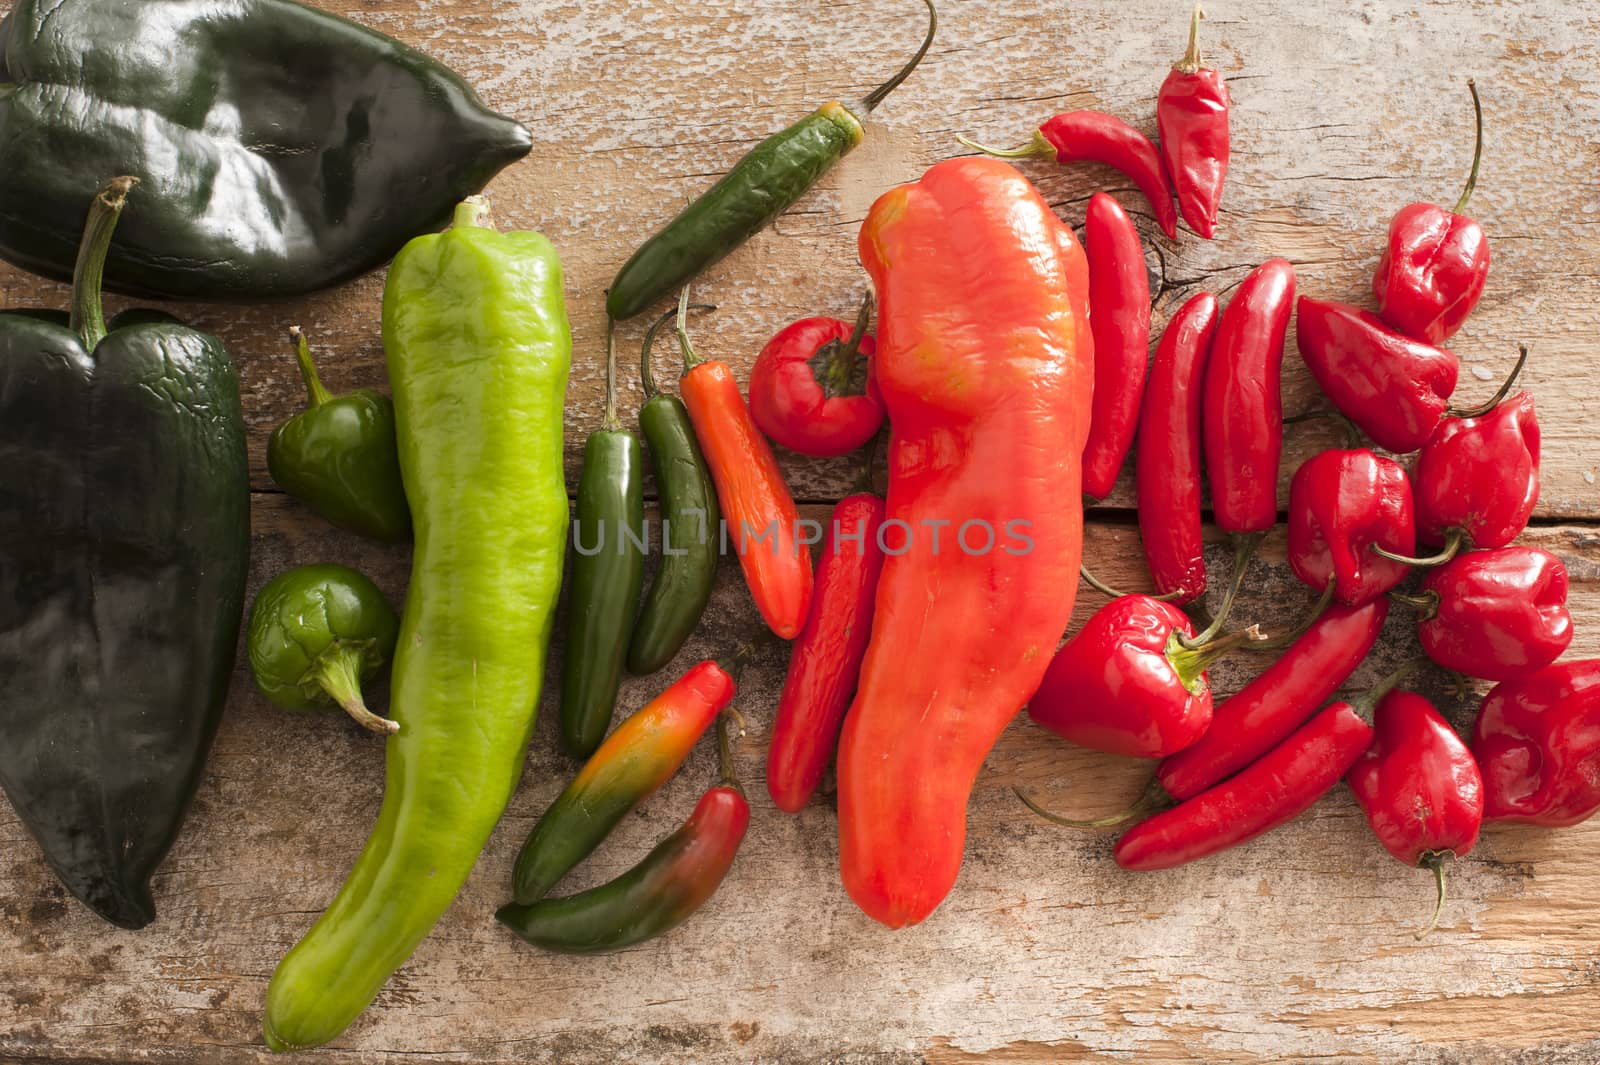 Colorful selection of spicy peppers on table by stockarch